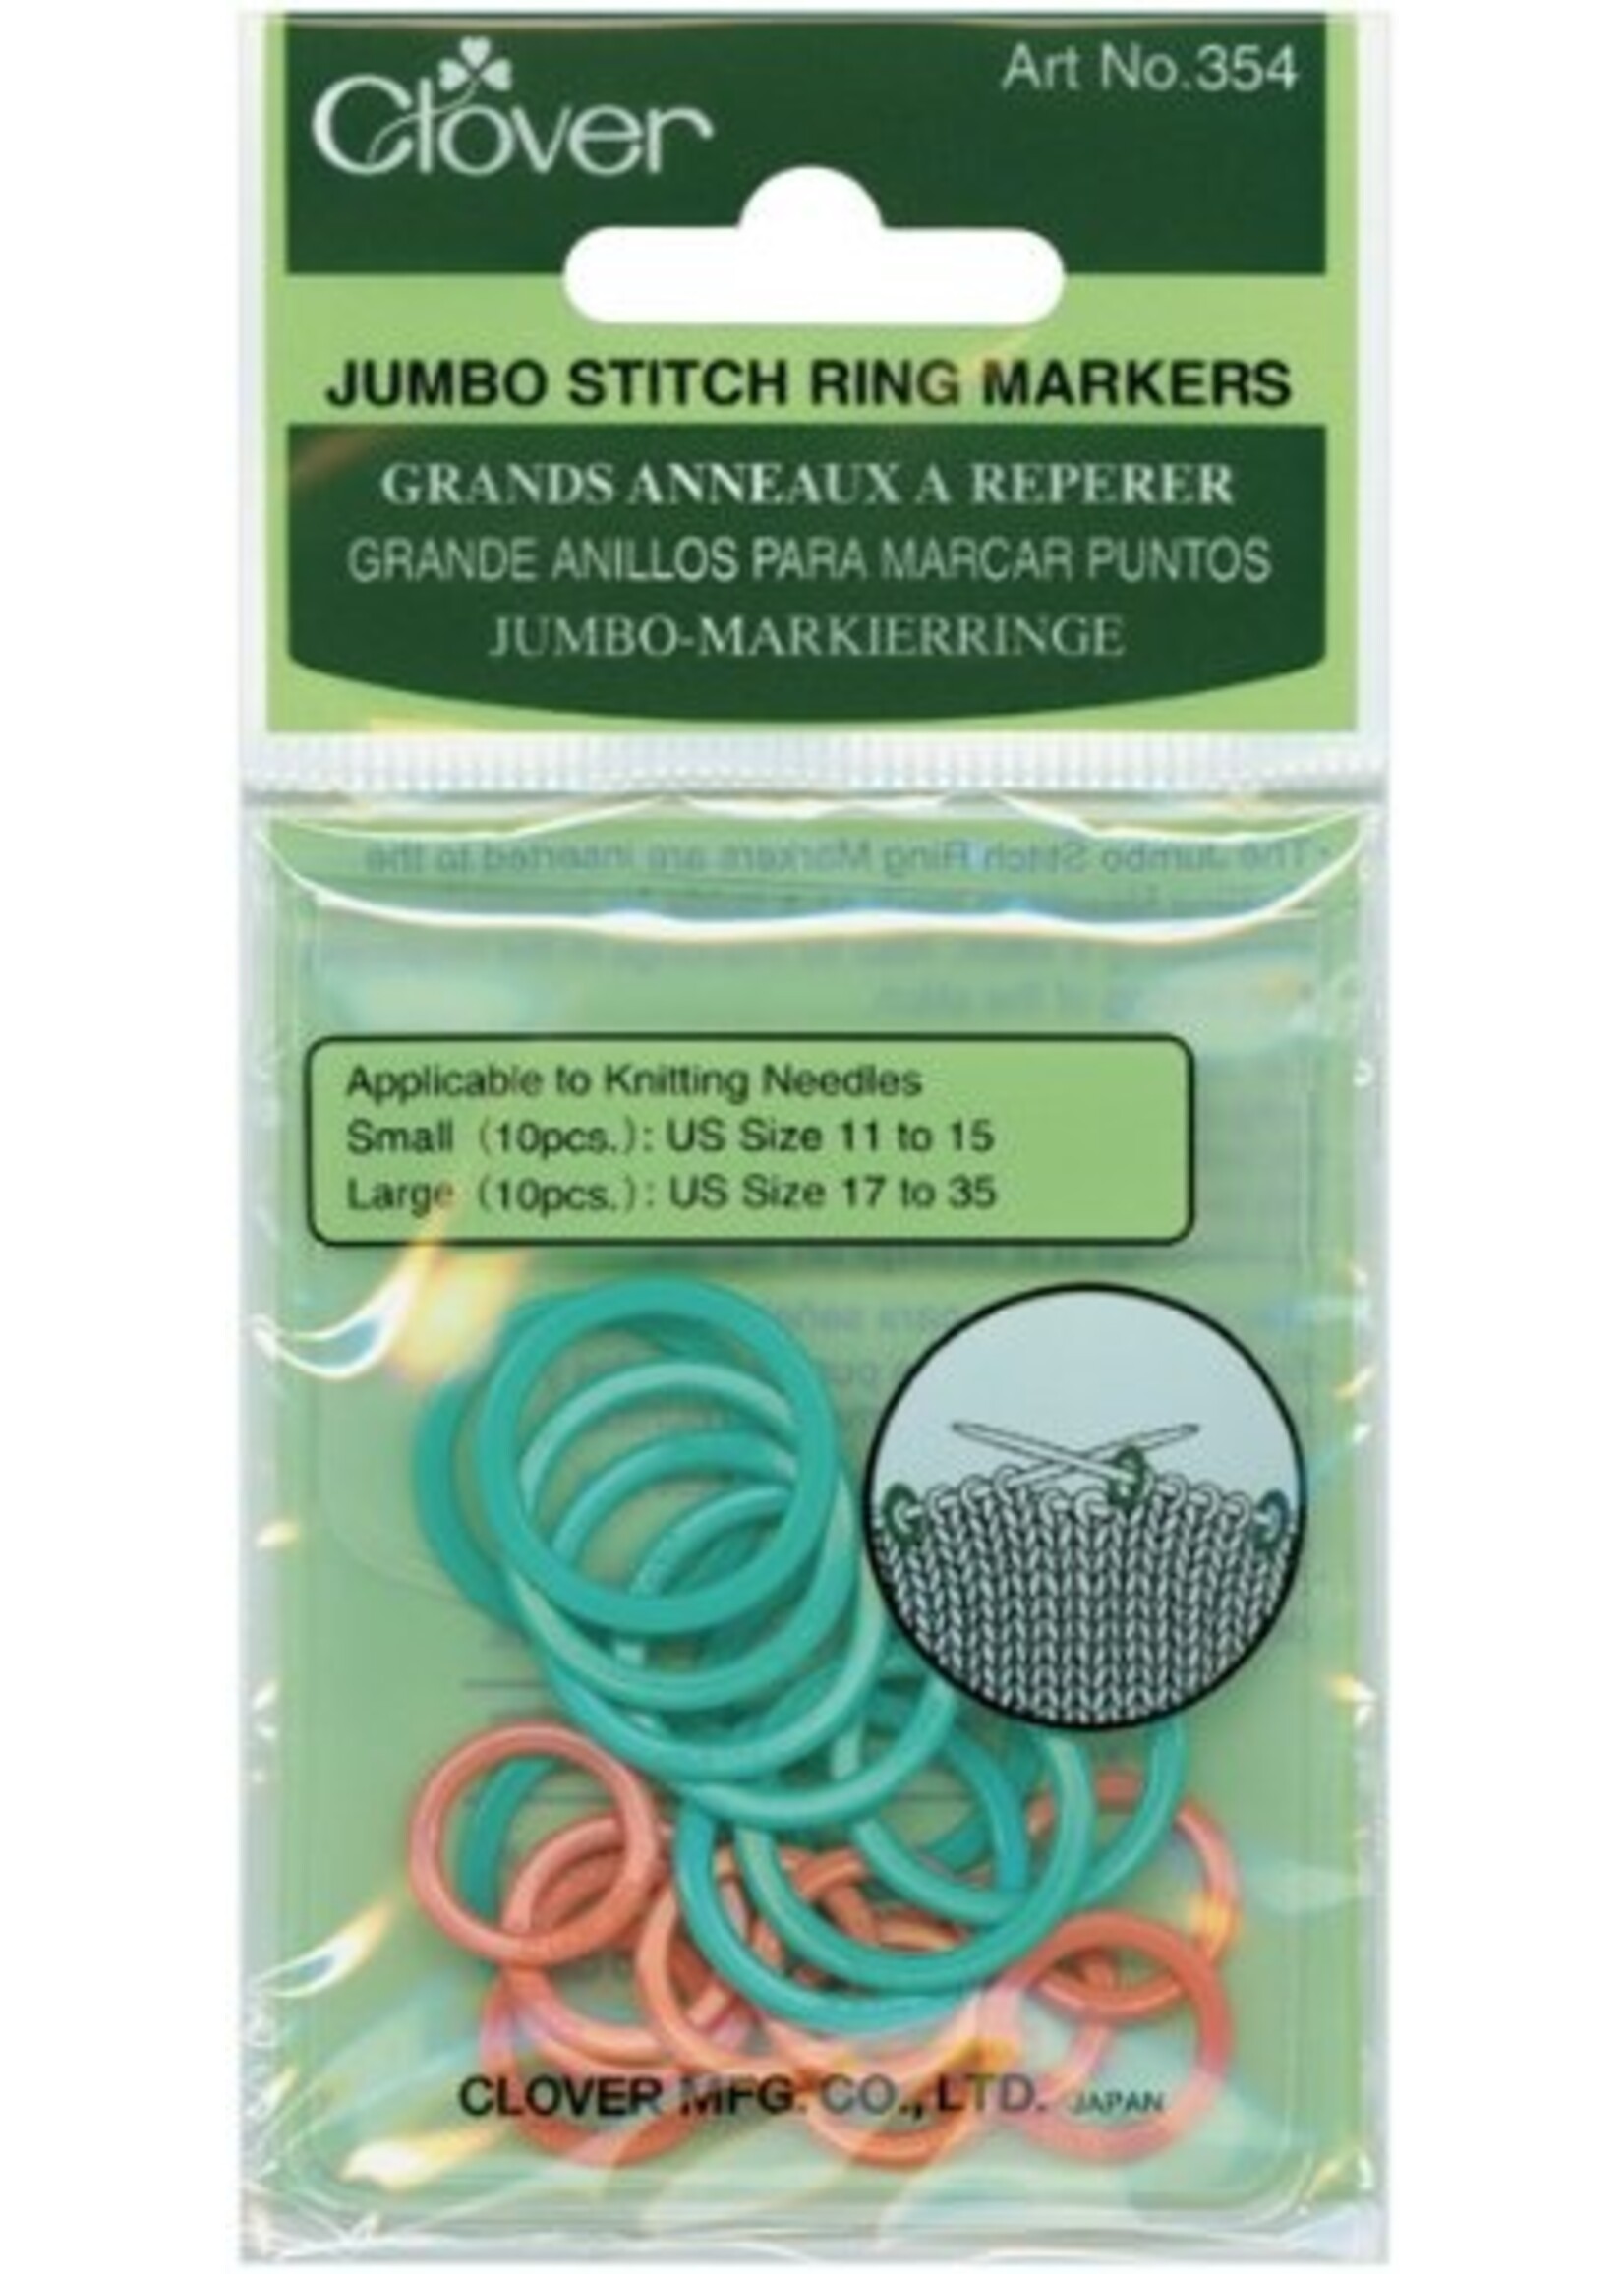 Clover Clover Ring markers 354